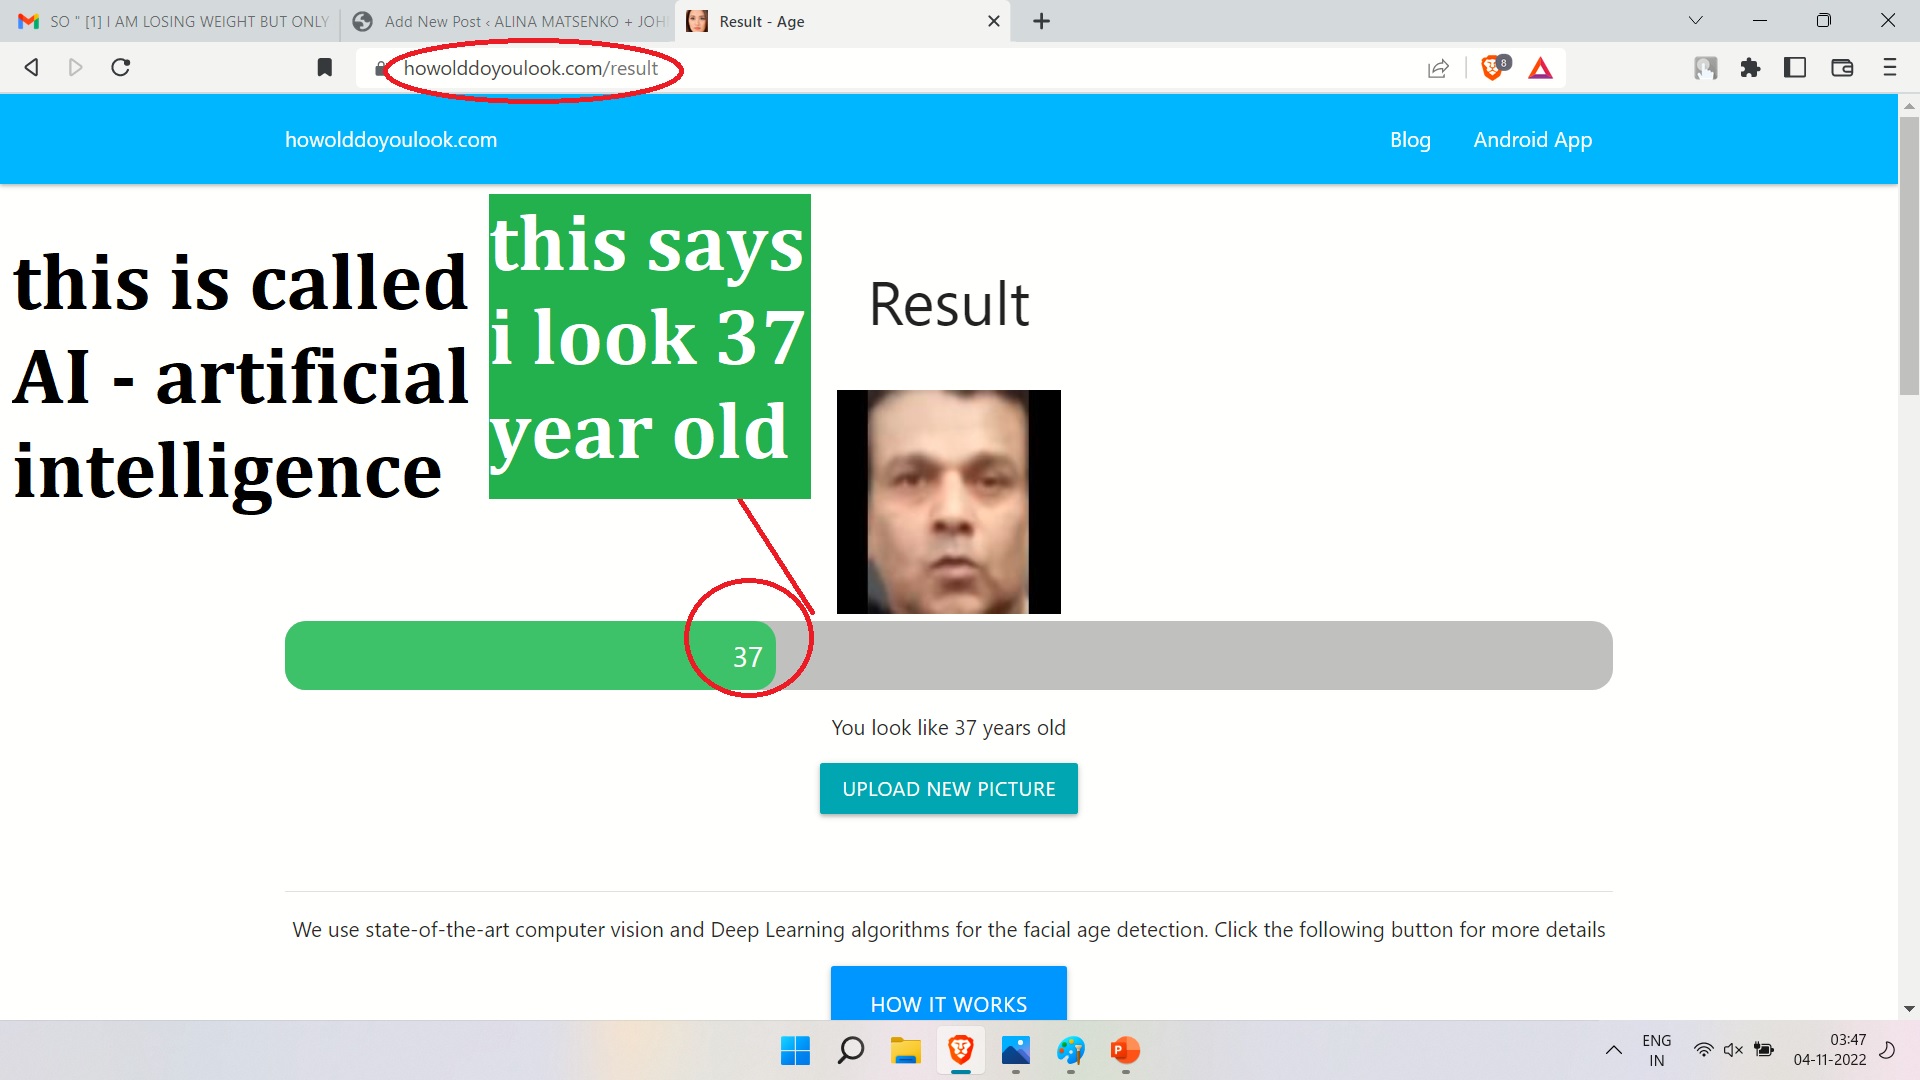 ajay mishra age - accoridng to how old do you look ai based app i lok 37 year old - ok miss alina matsenko memsaheb u are my inspiration and yeah joe biden is fit too for his age